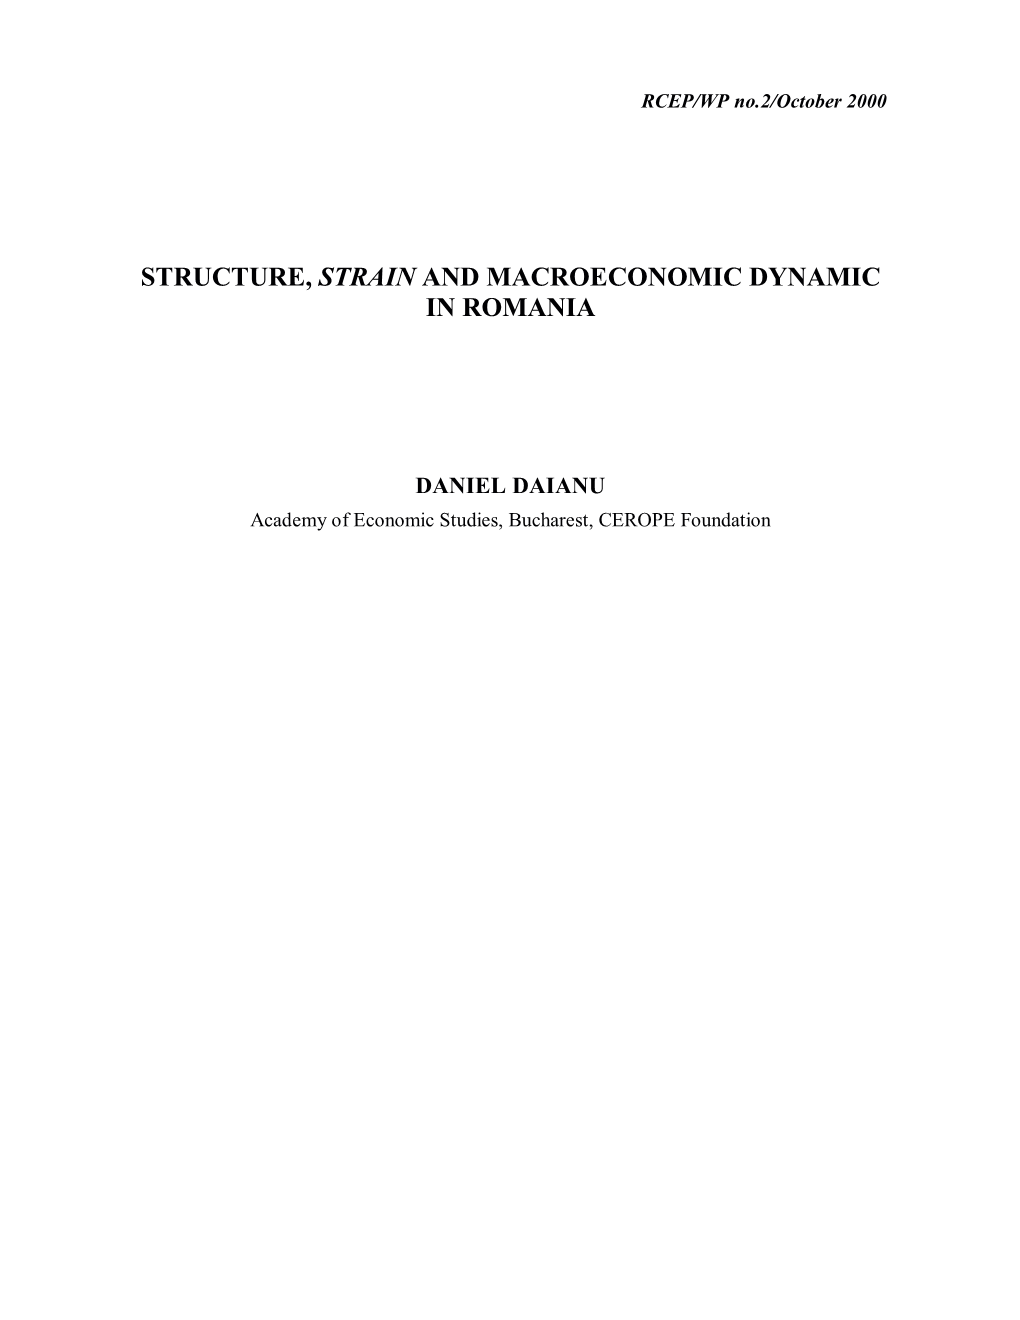 Structure, Strain and Macroeconomic Dynamic in Romania